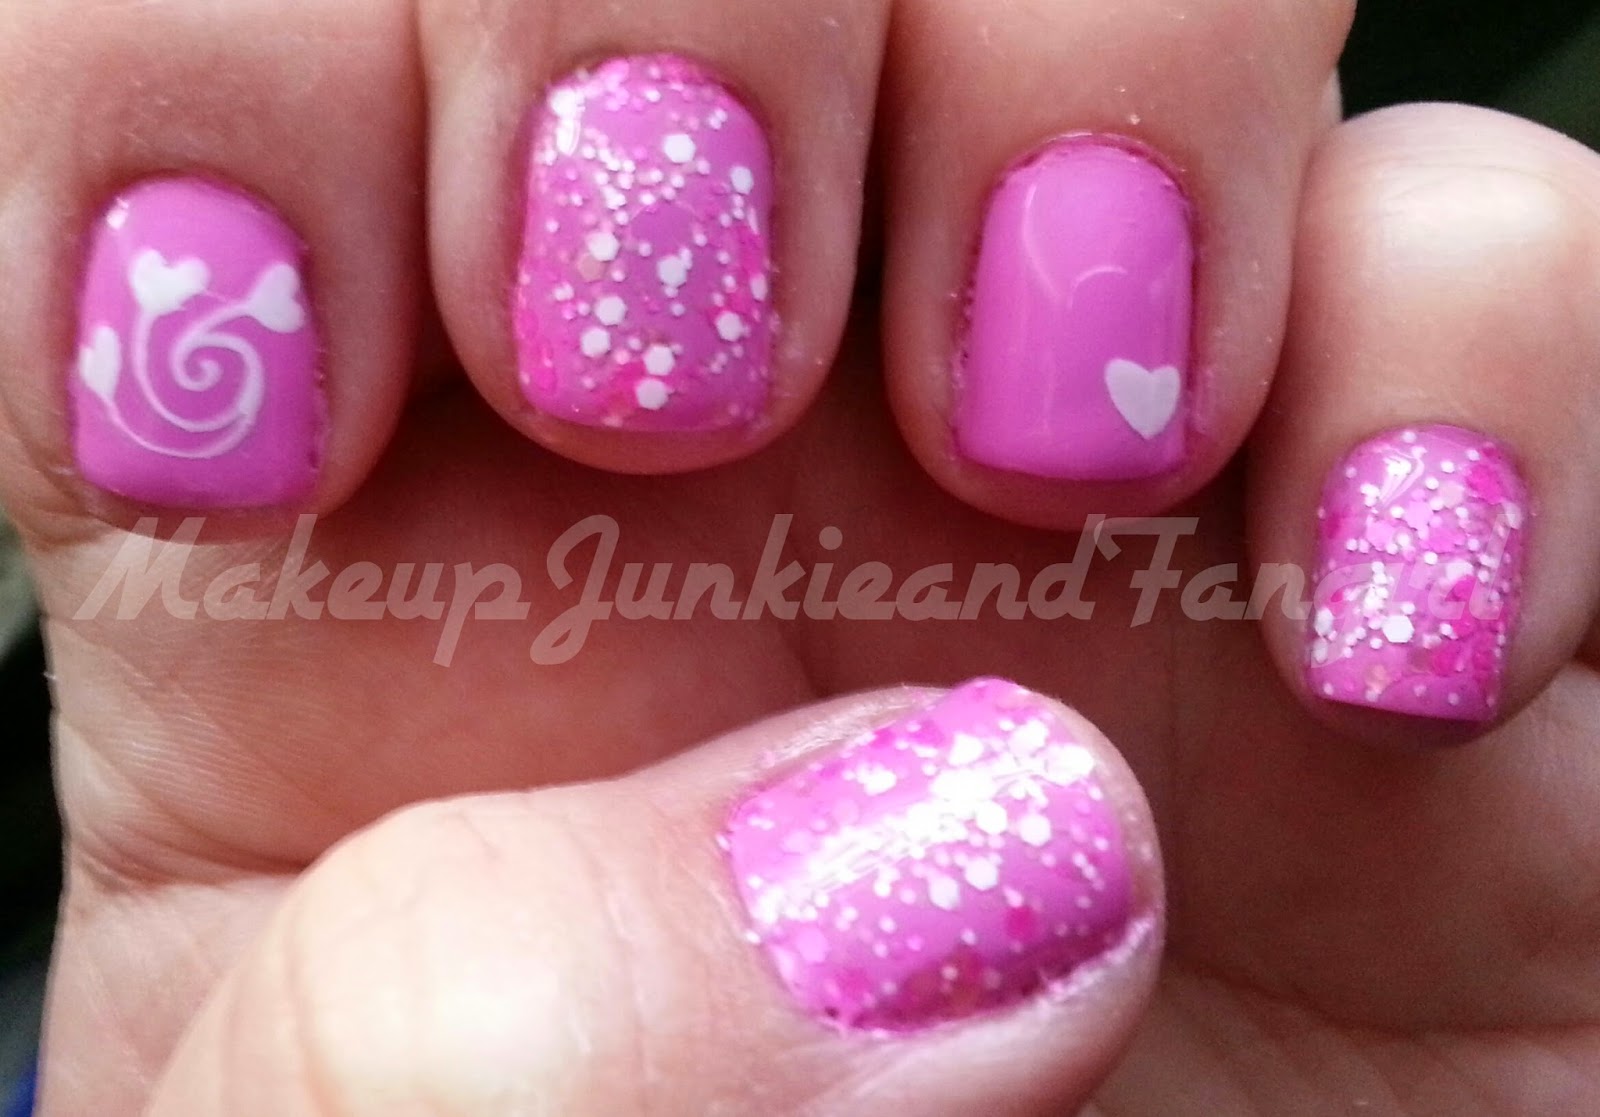 Makeup Junkie and Fangirl: Pink Valentine's Day Mani